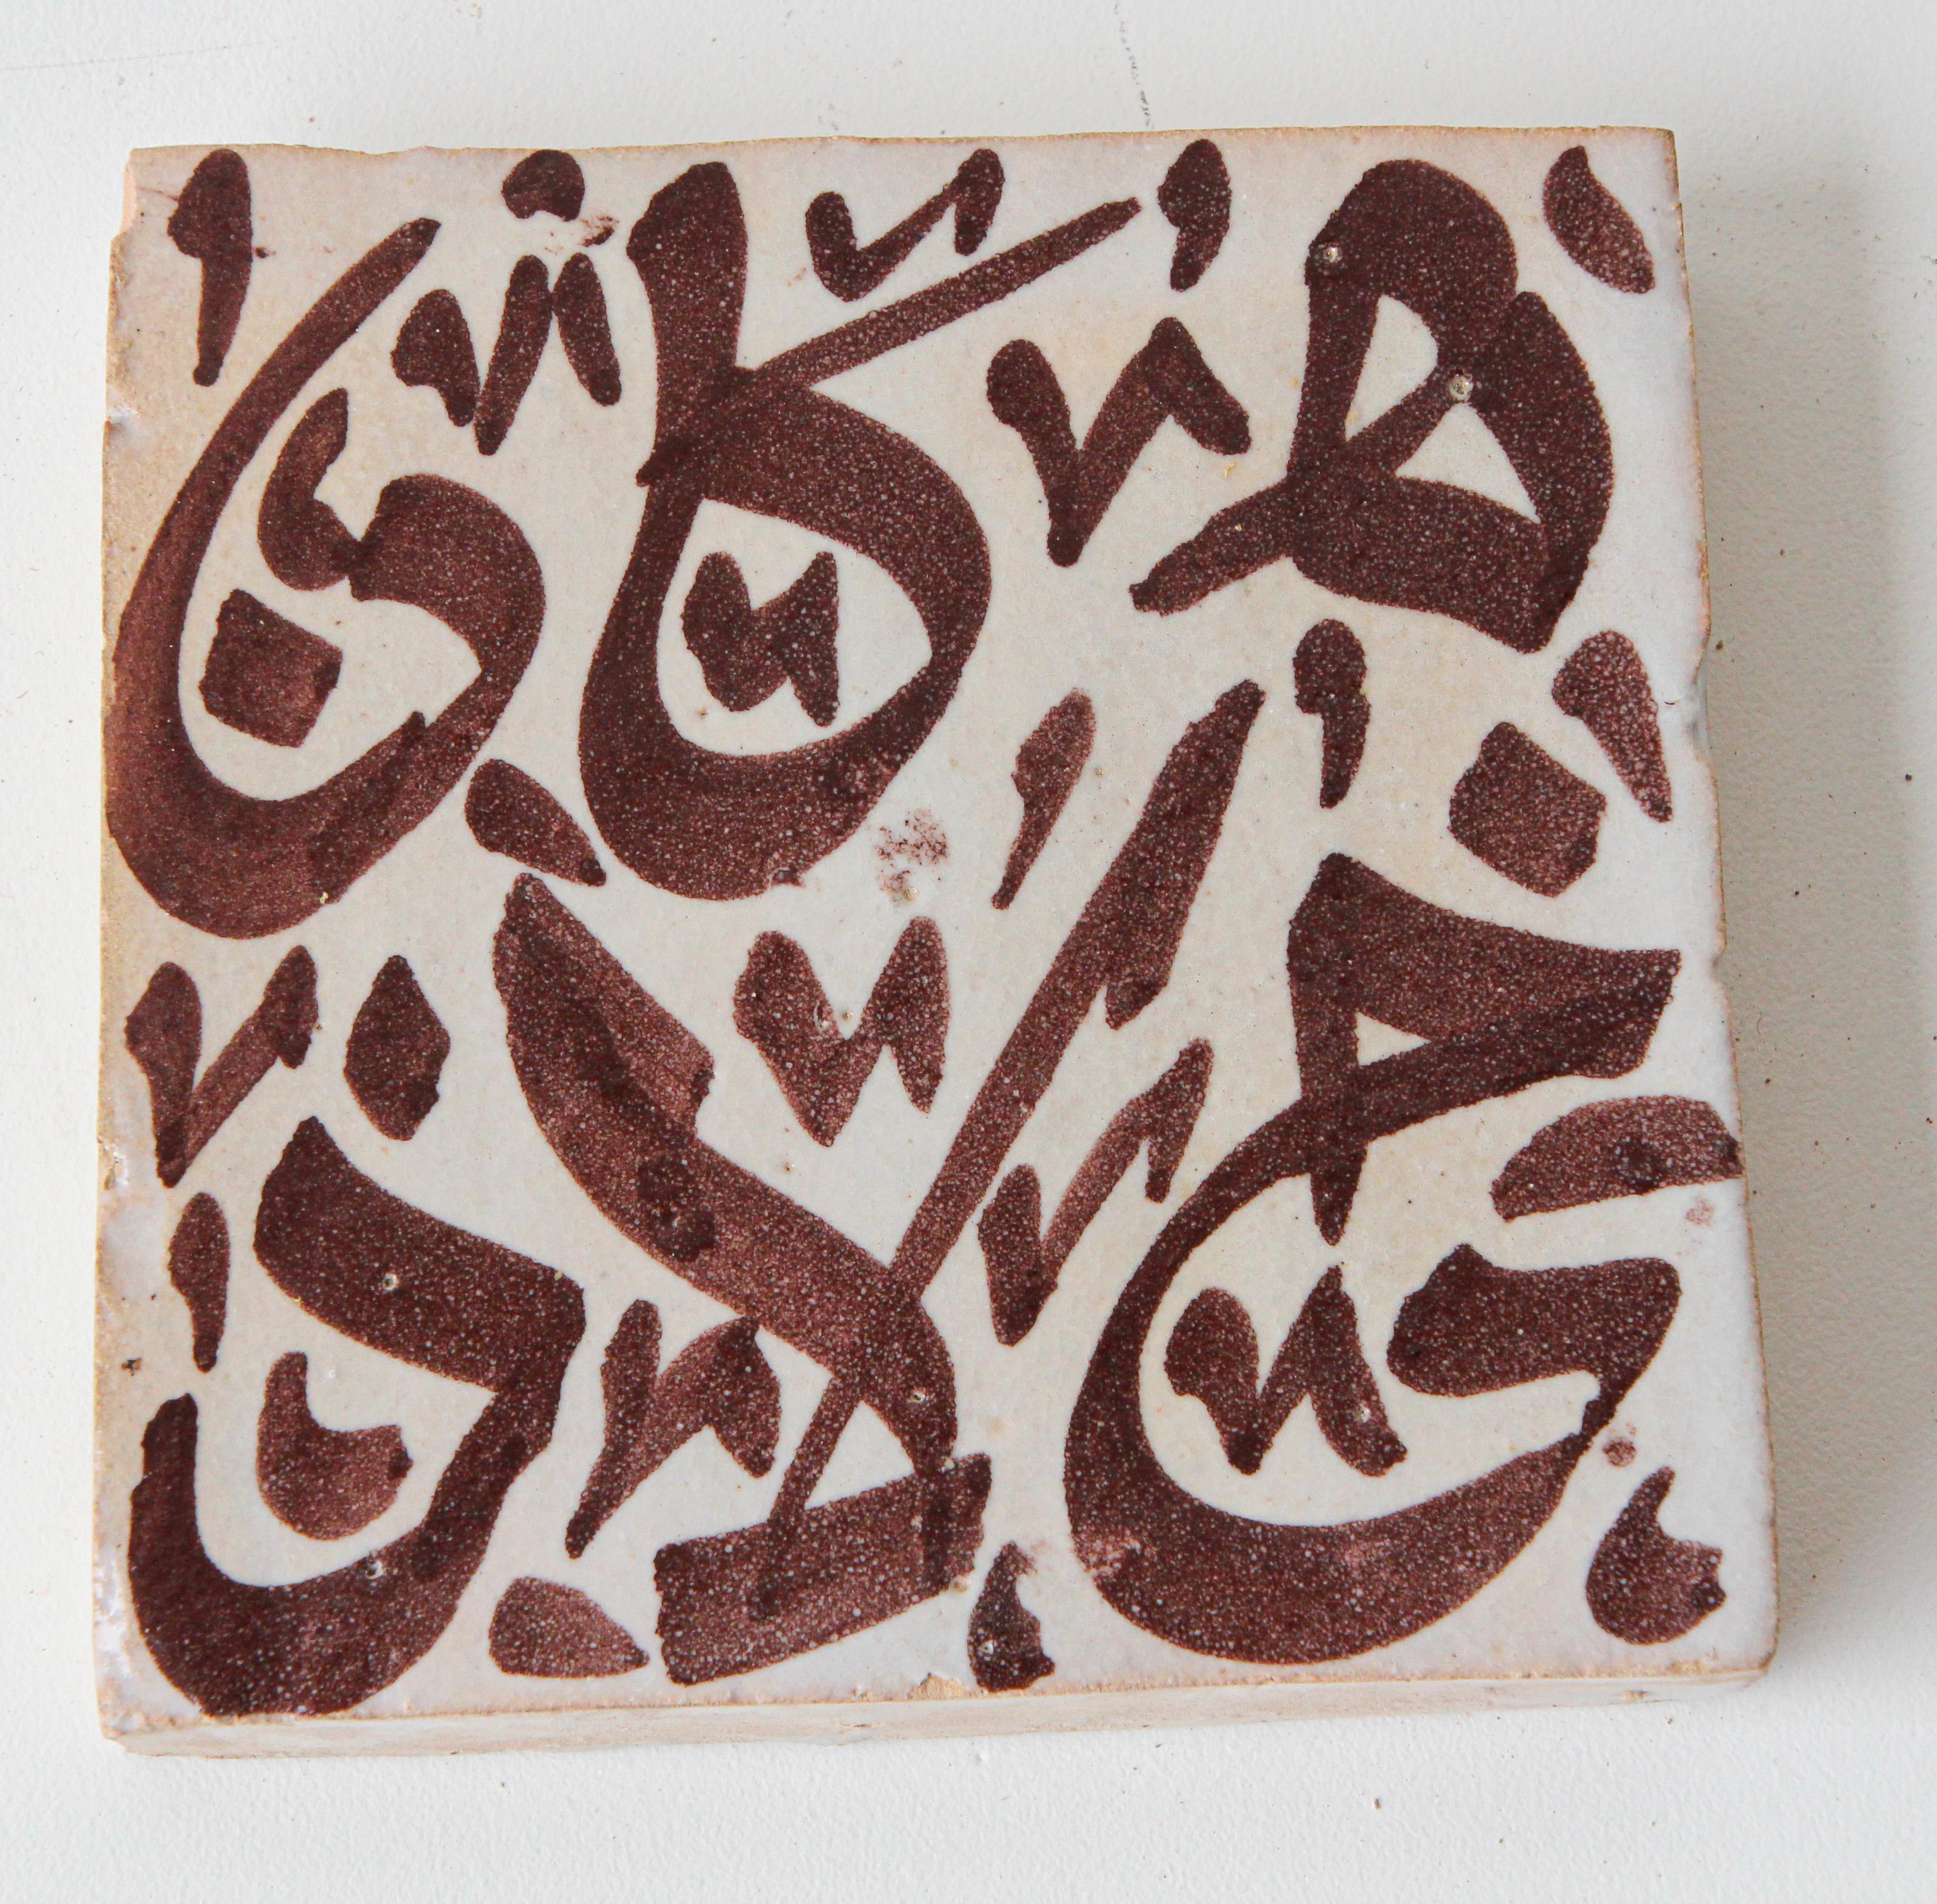 Hand-Crafted Moorish Tile with Arabic Brown Writing For Sale